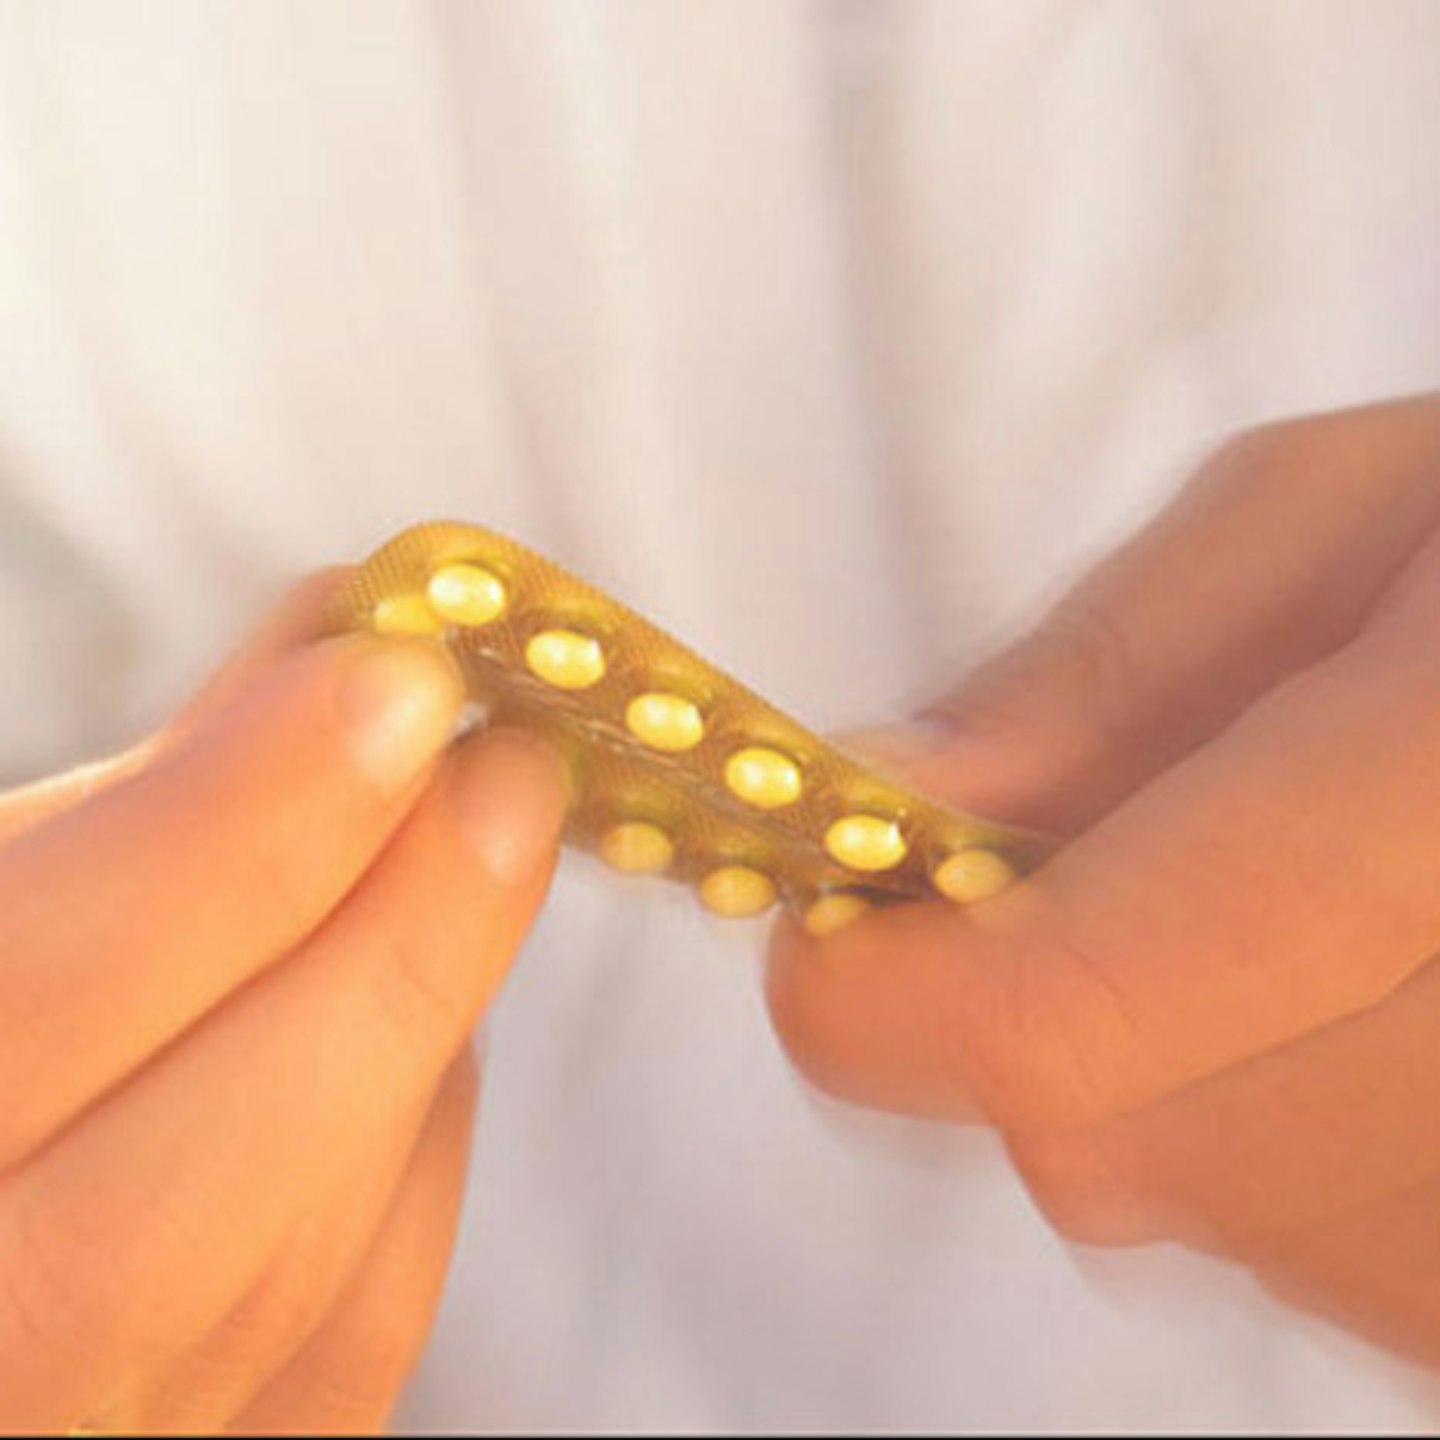 The pill was the most popular choice of contraception